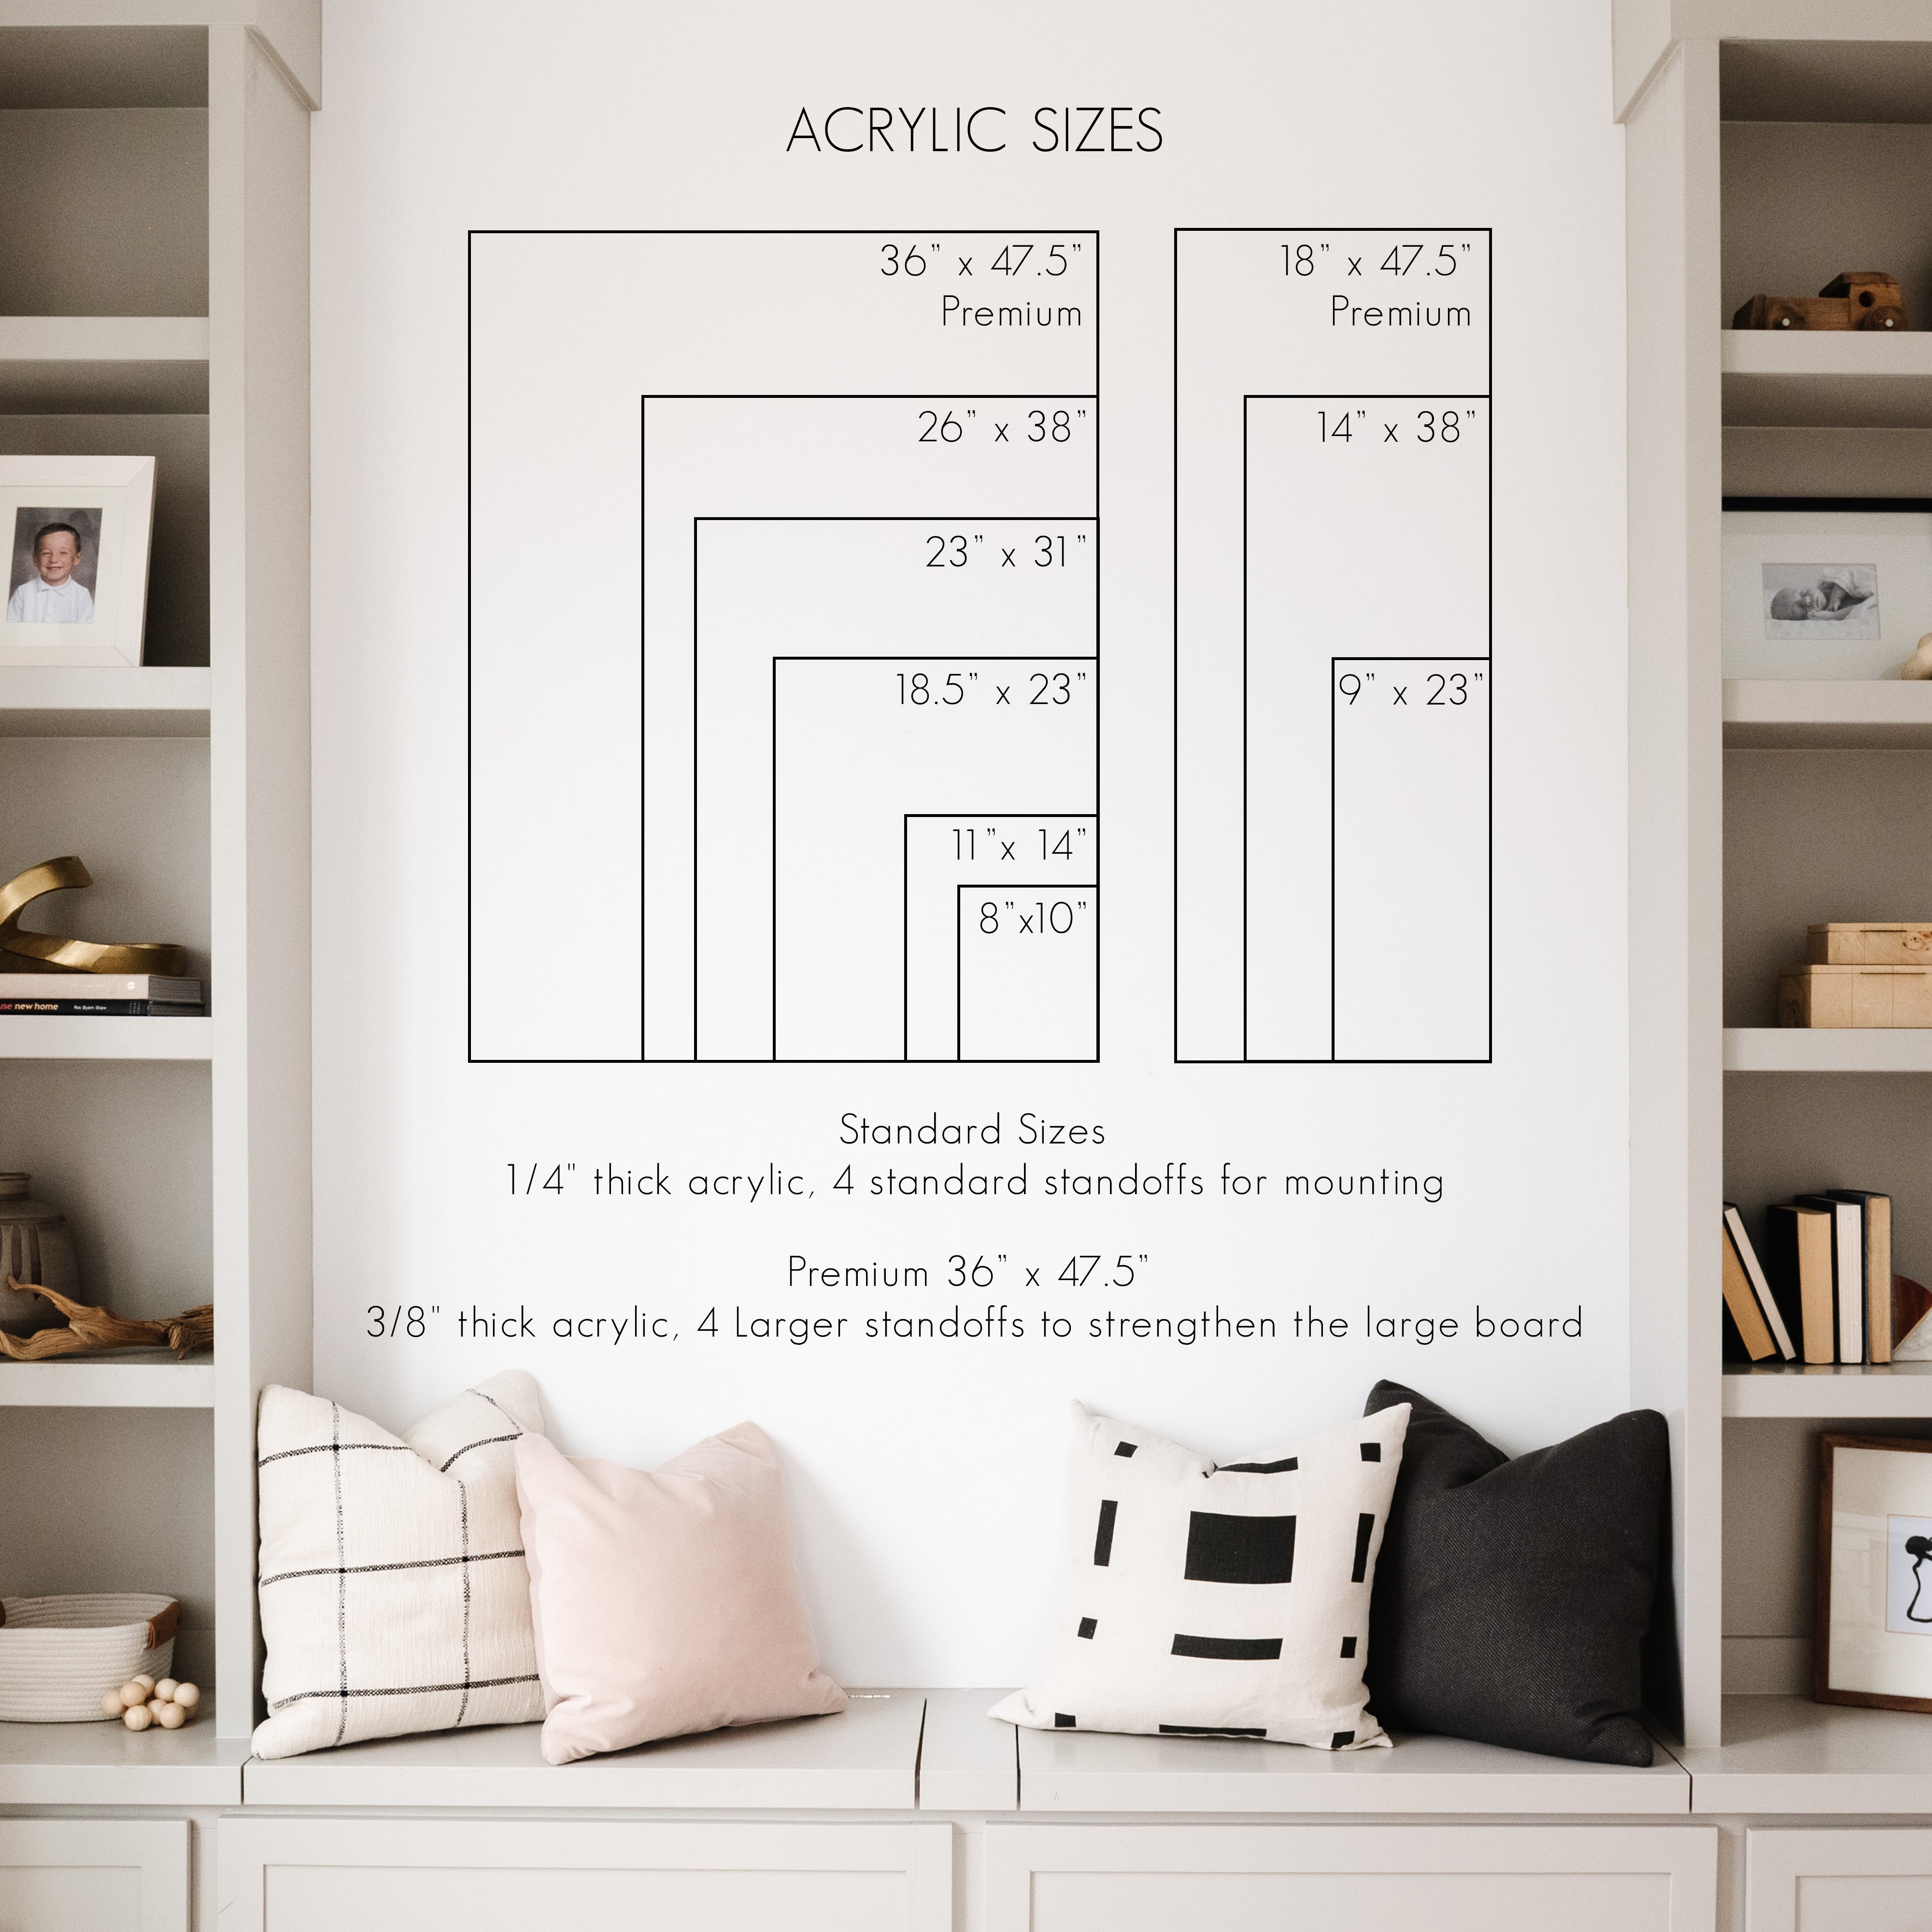 2 Month Frosted Acrylic Calendar + 2 Sections | Vertical Pennington